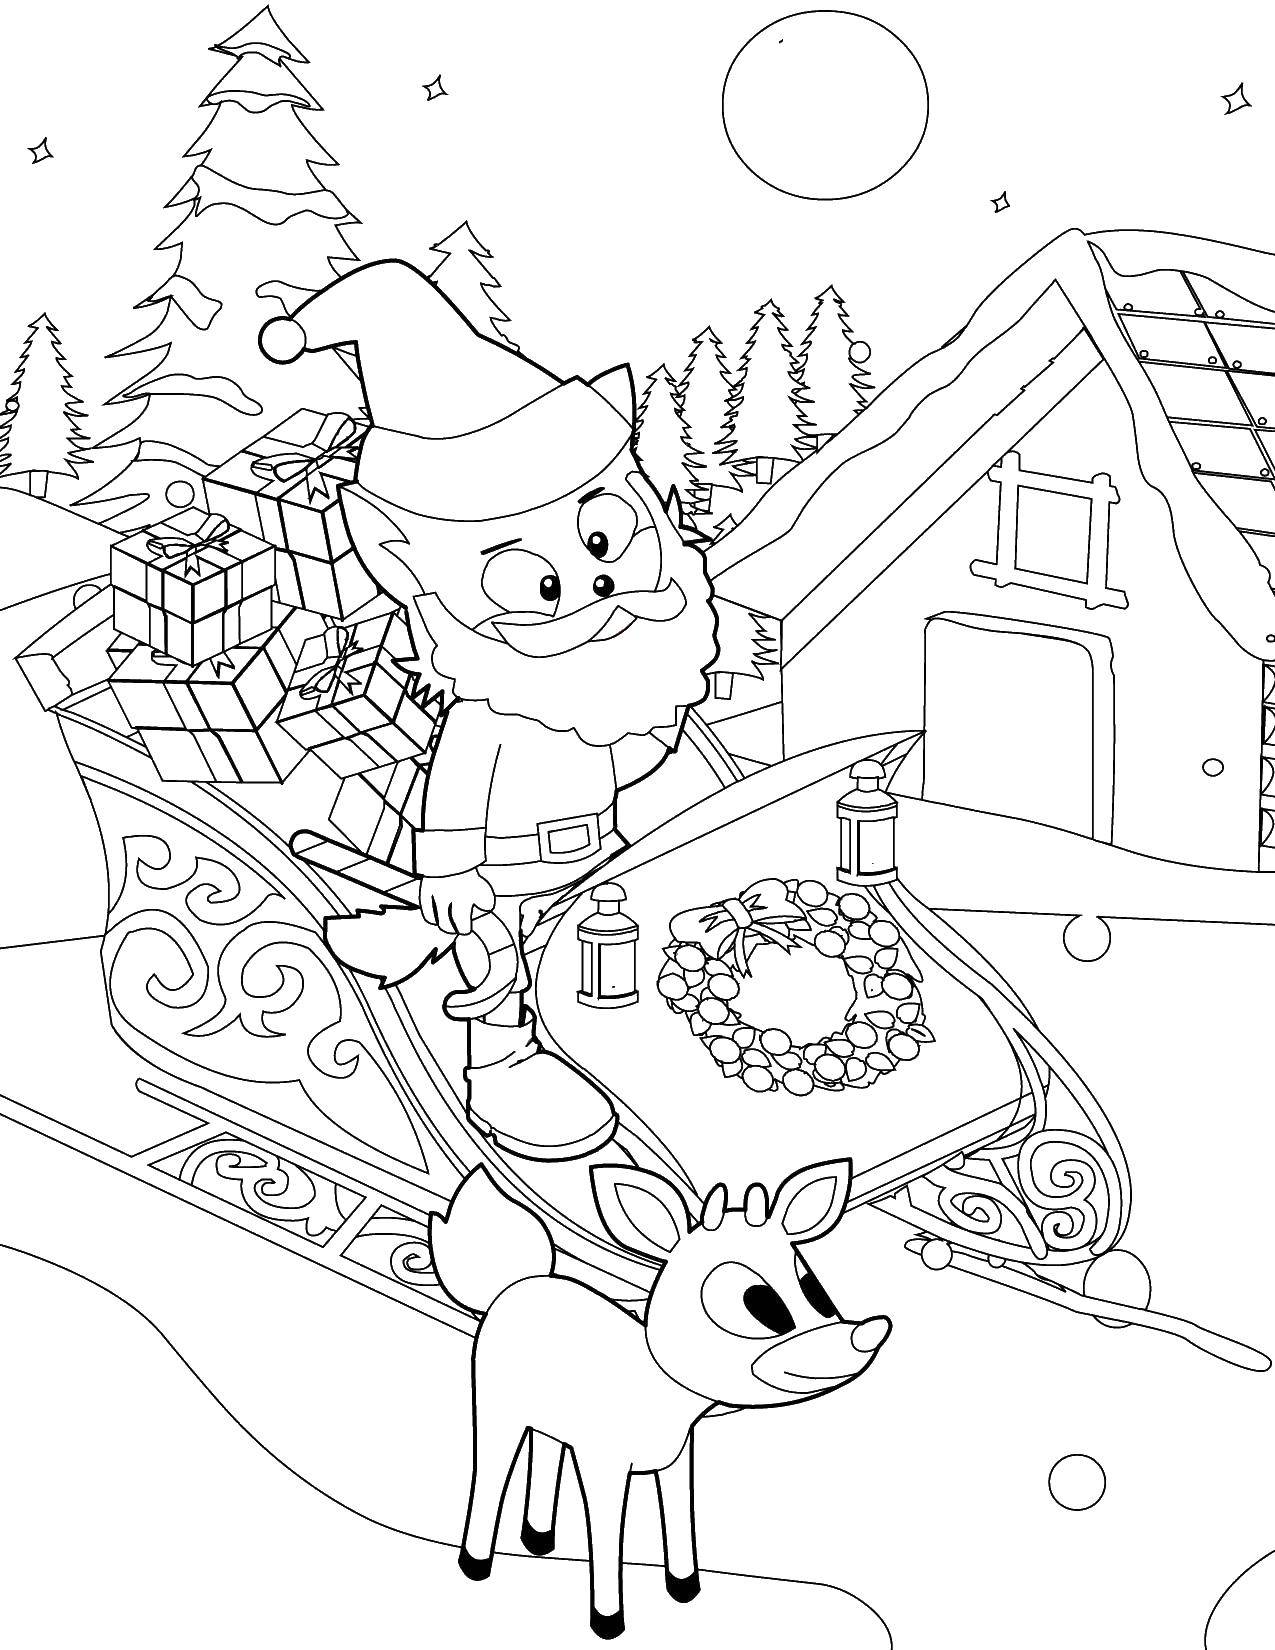 Coloring Santa sleigh and reindeer. Category Christmas. Tags:  Christmas, Santa Claus, reindeer, sleigh.